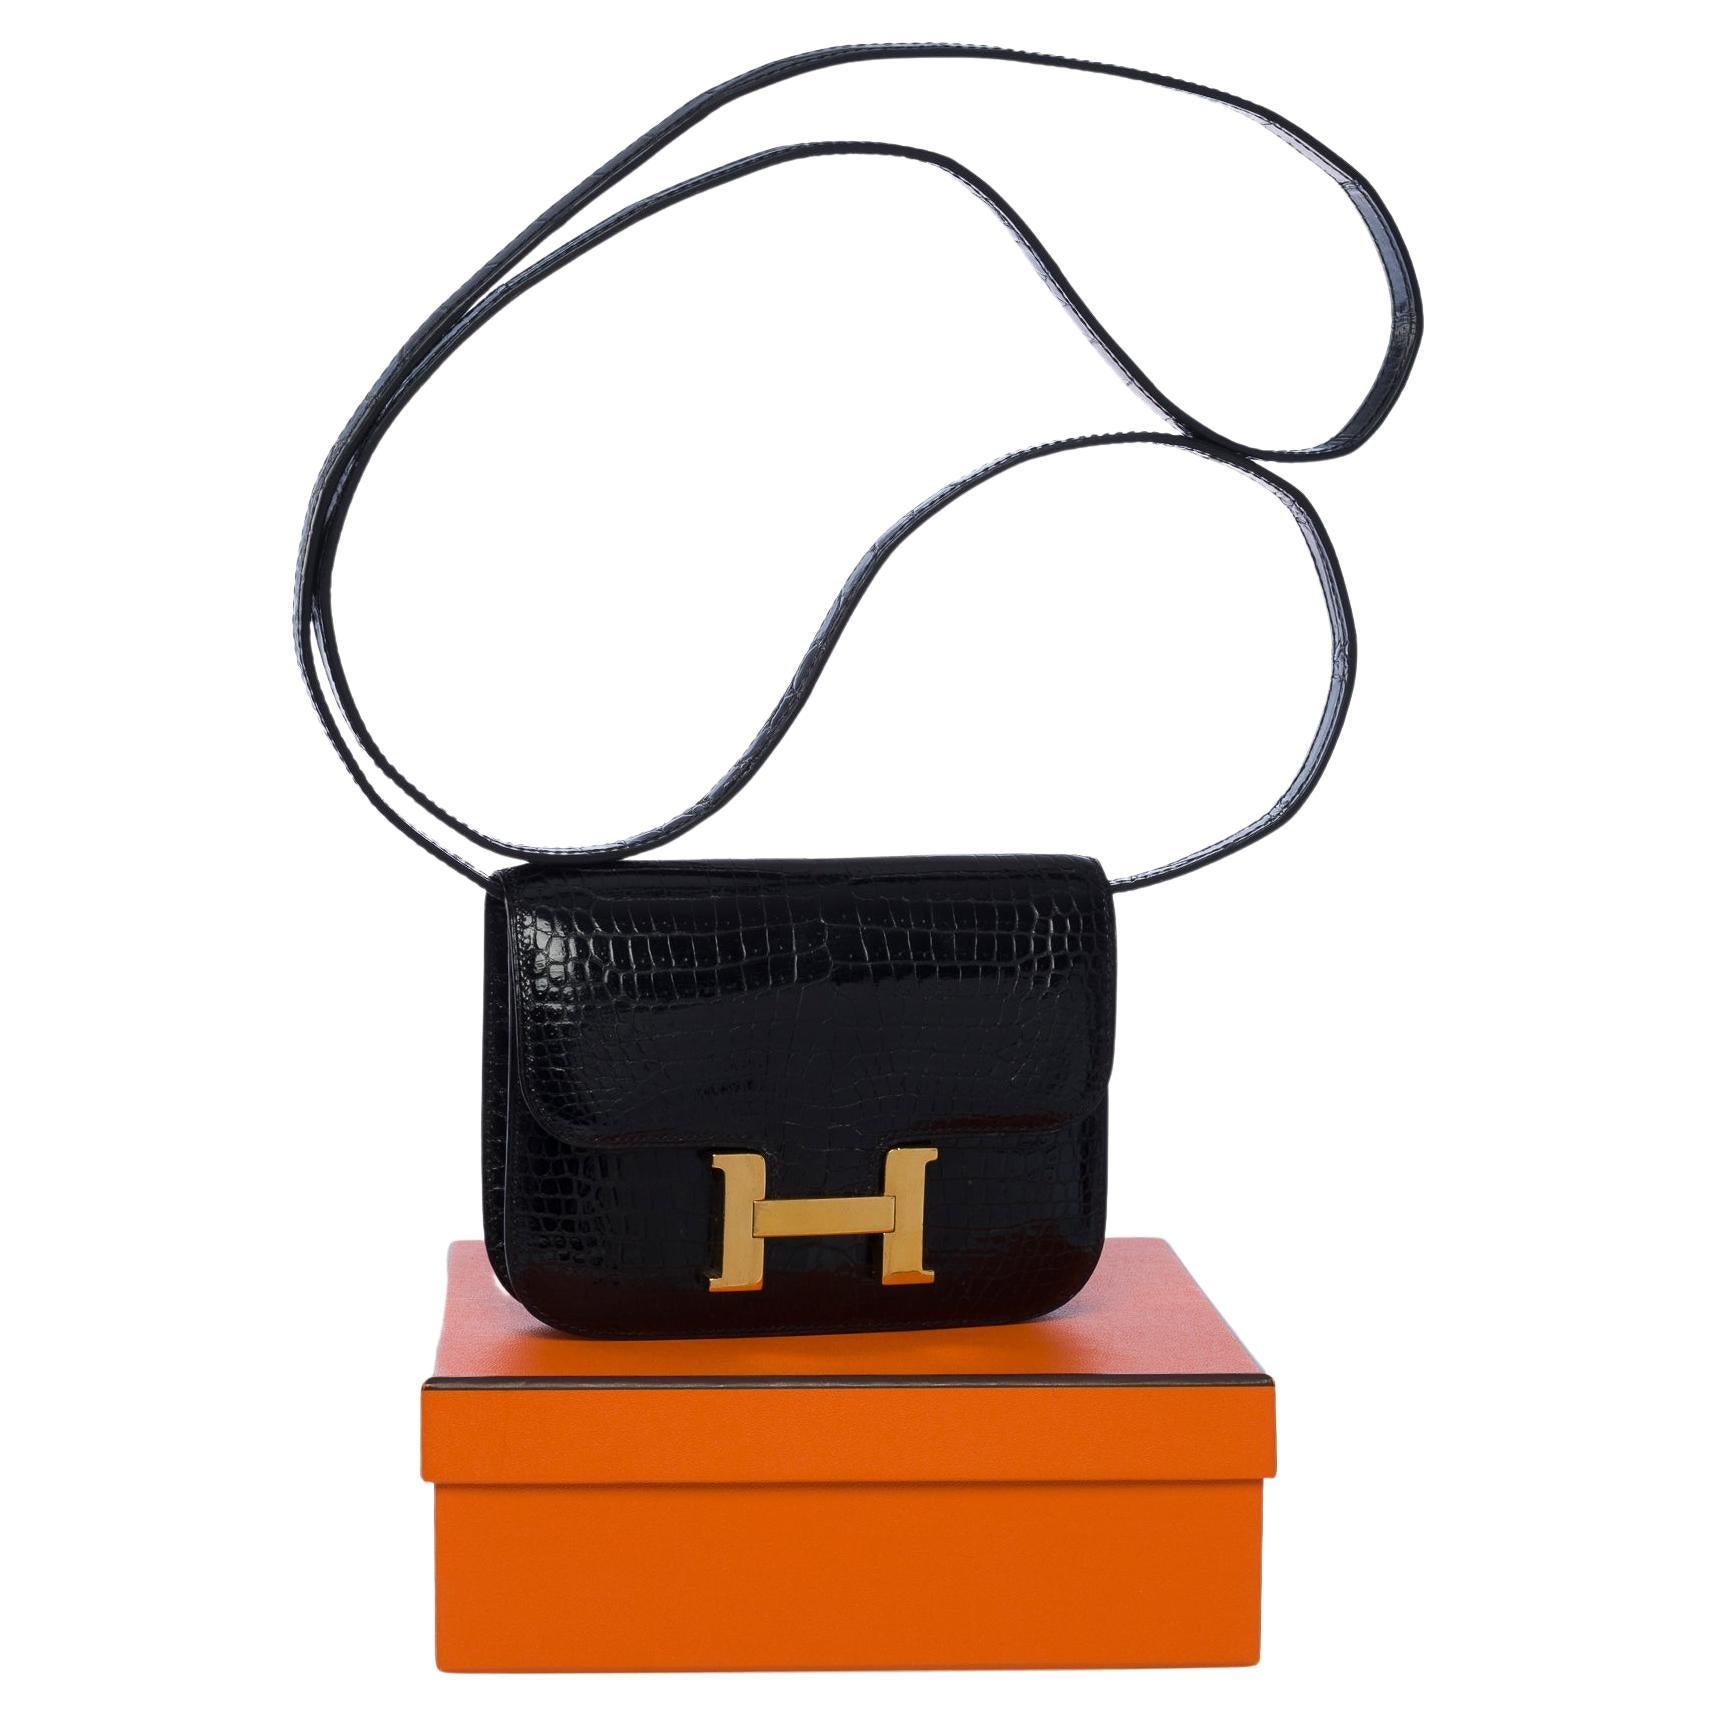 Collector Hermes Constance Micro Clutch flap bag in black Porosus Crocodile, GHW For Sale